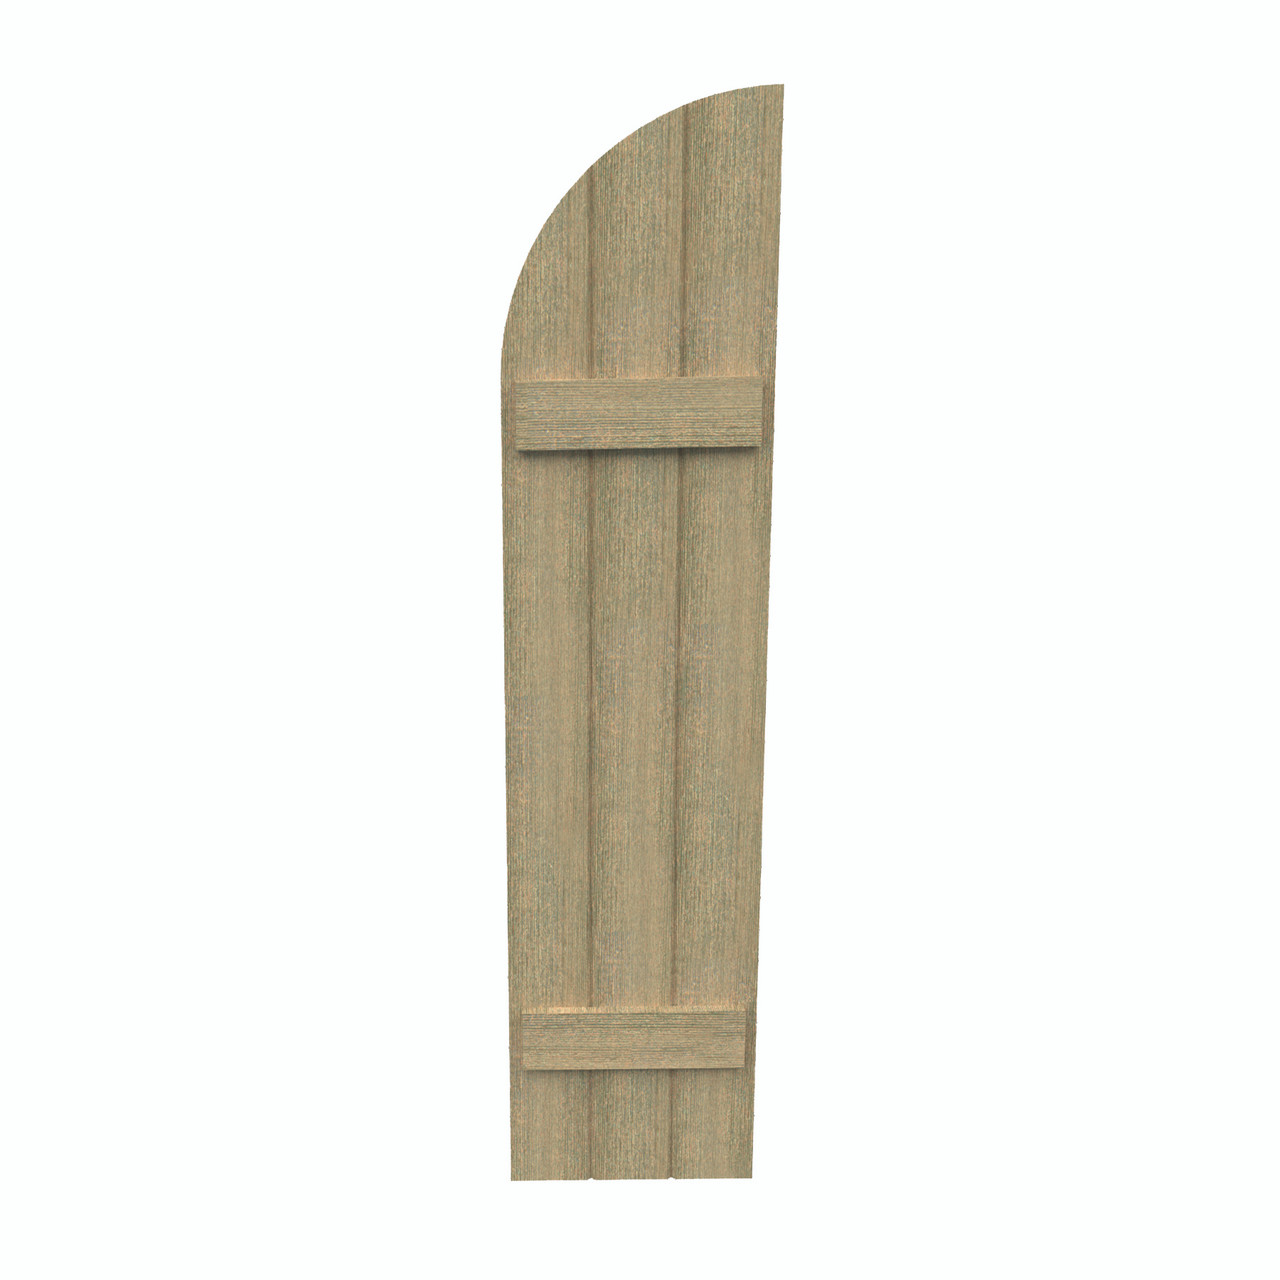 18 inch by 36 inch Quarter Round Shutter with 3-Boards